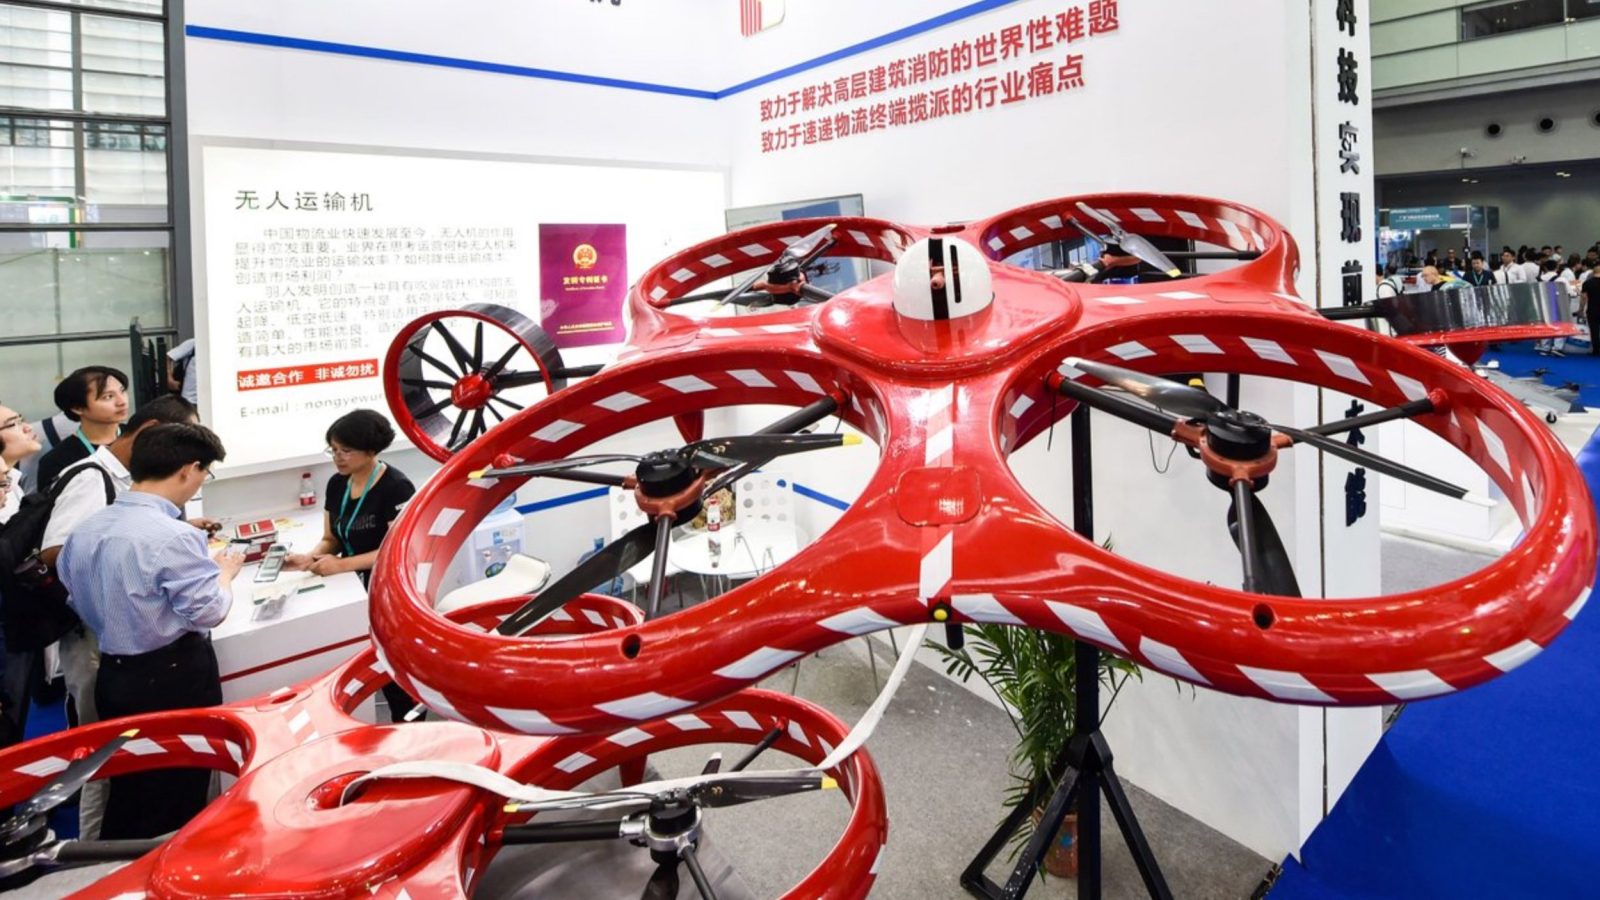 Hundreds of drones are displayed at 2018 World Drone Congress and the Third Shenzhen International UAV Expo 2018